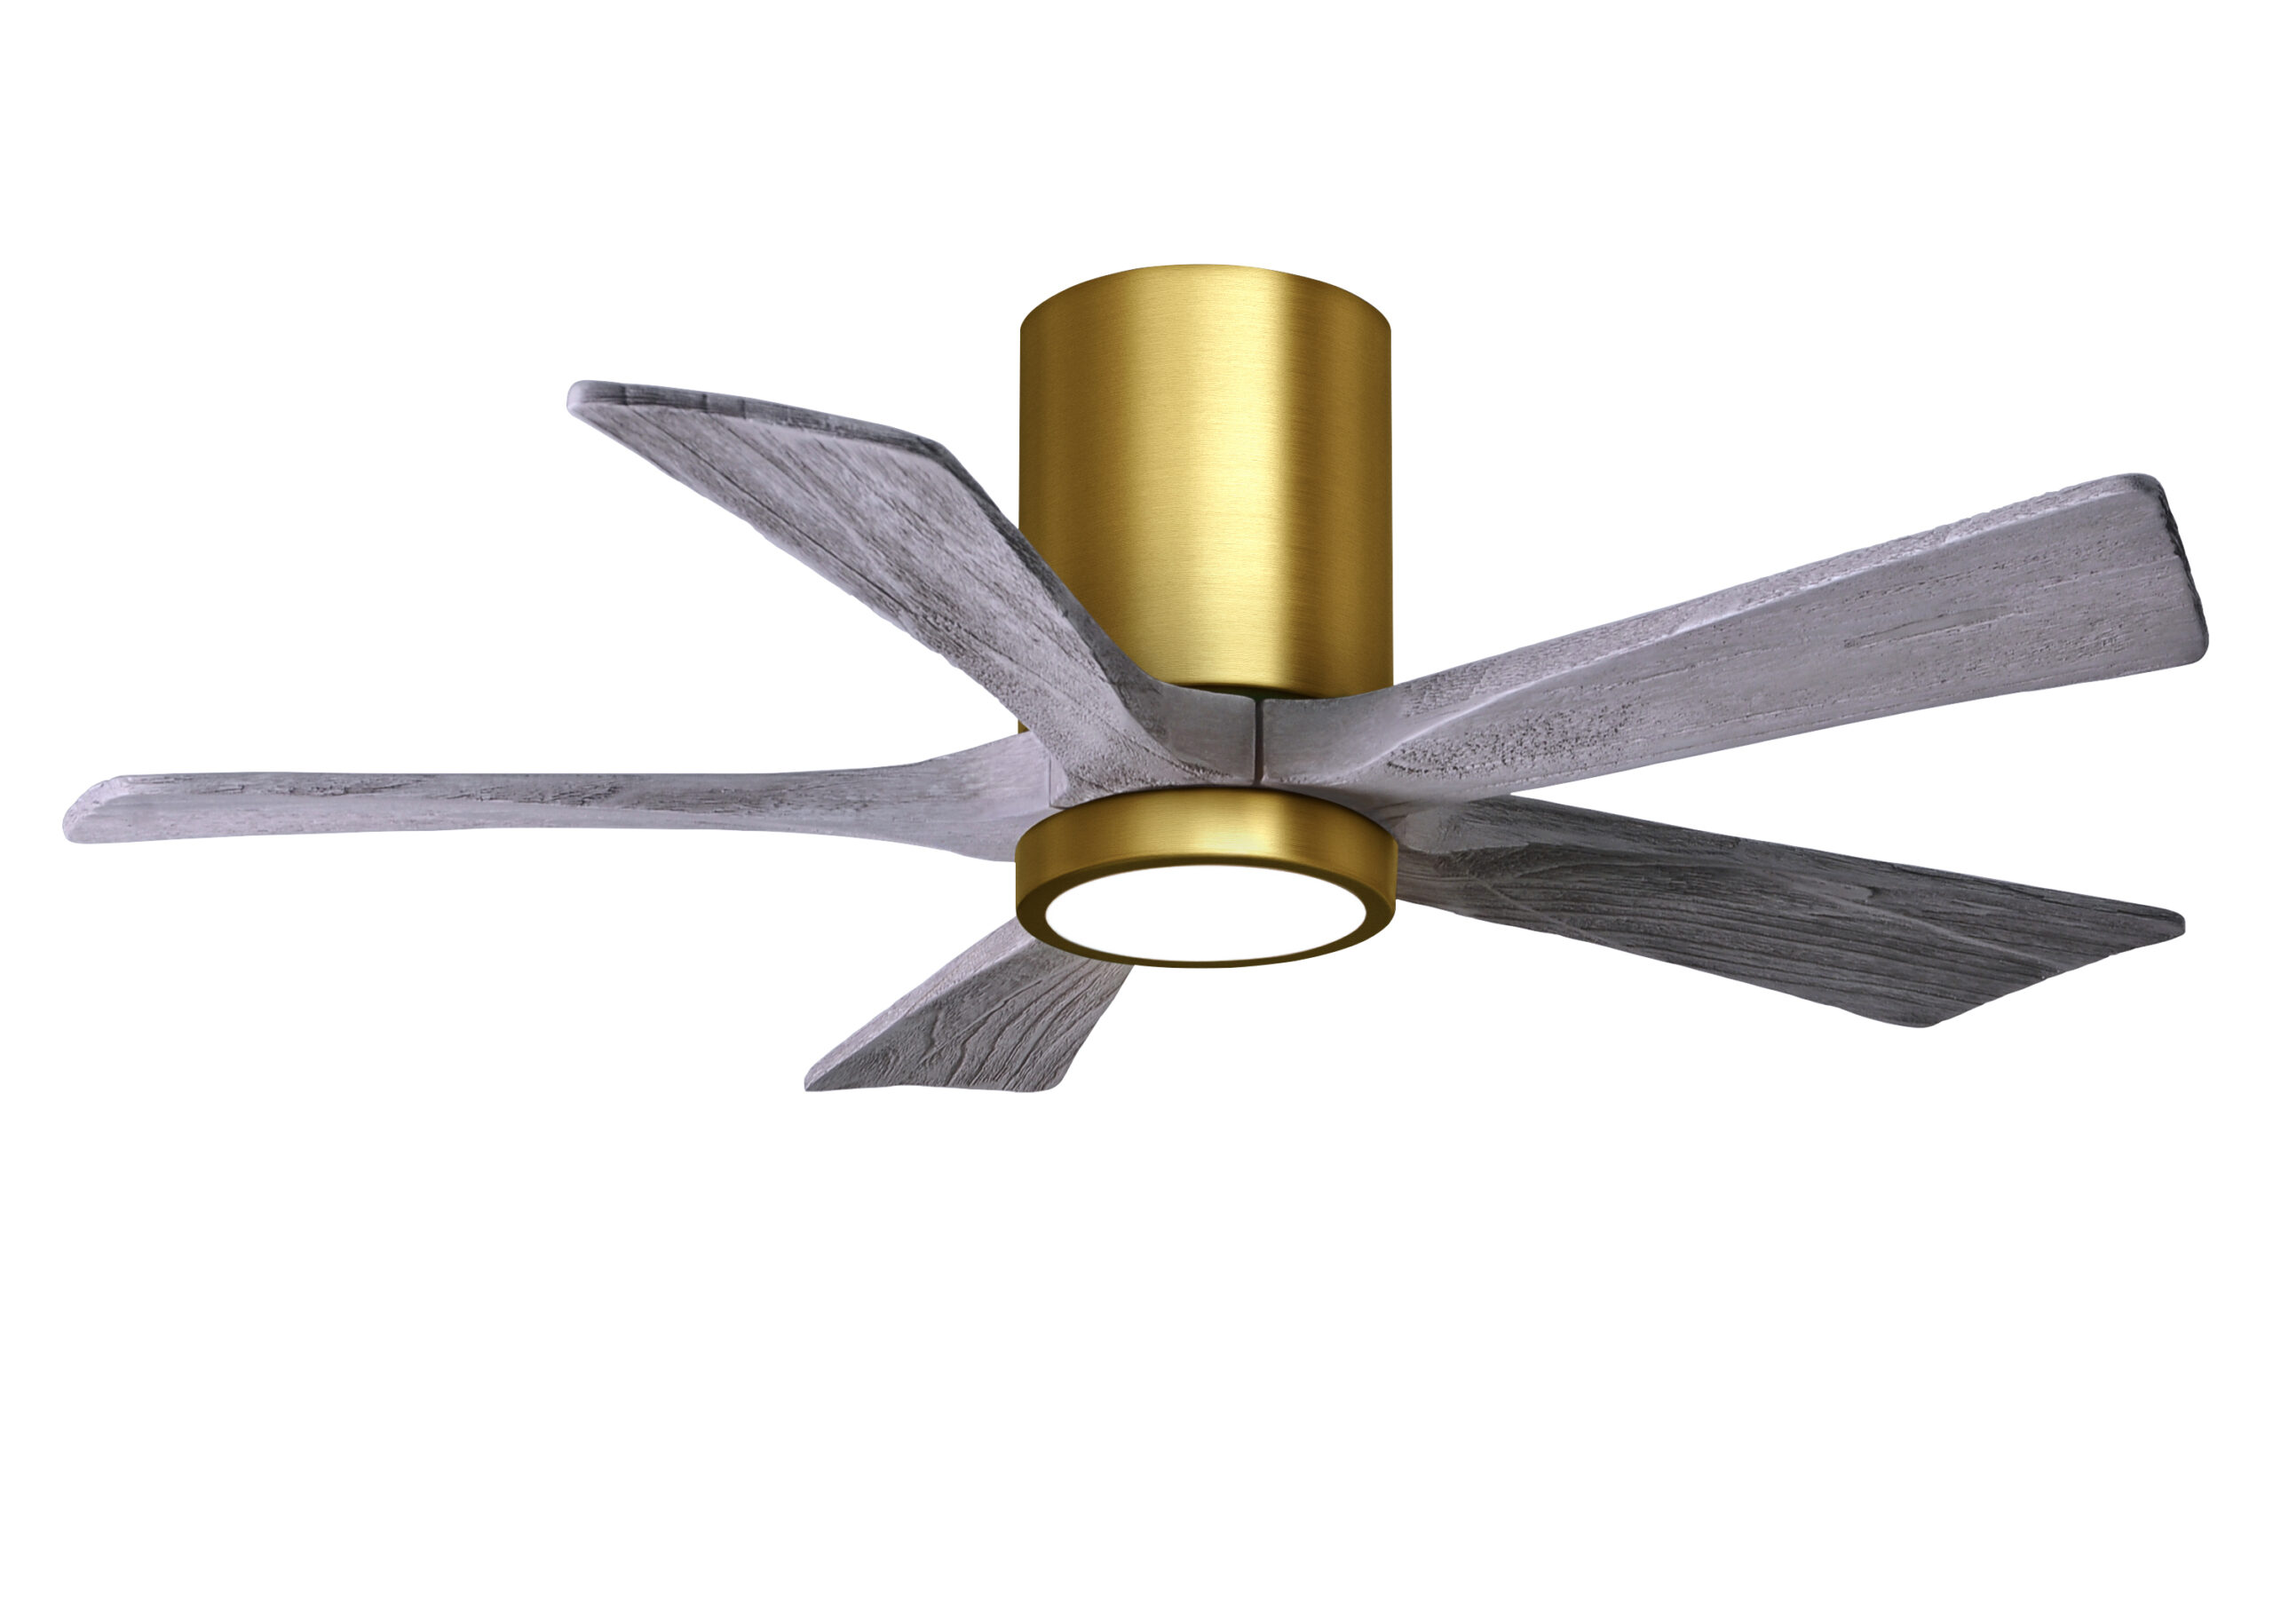 Irene-5HLK Ceiling Fan in Brushed Brass Finish with 42